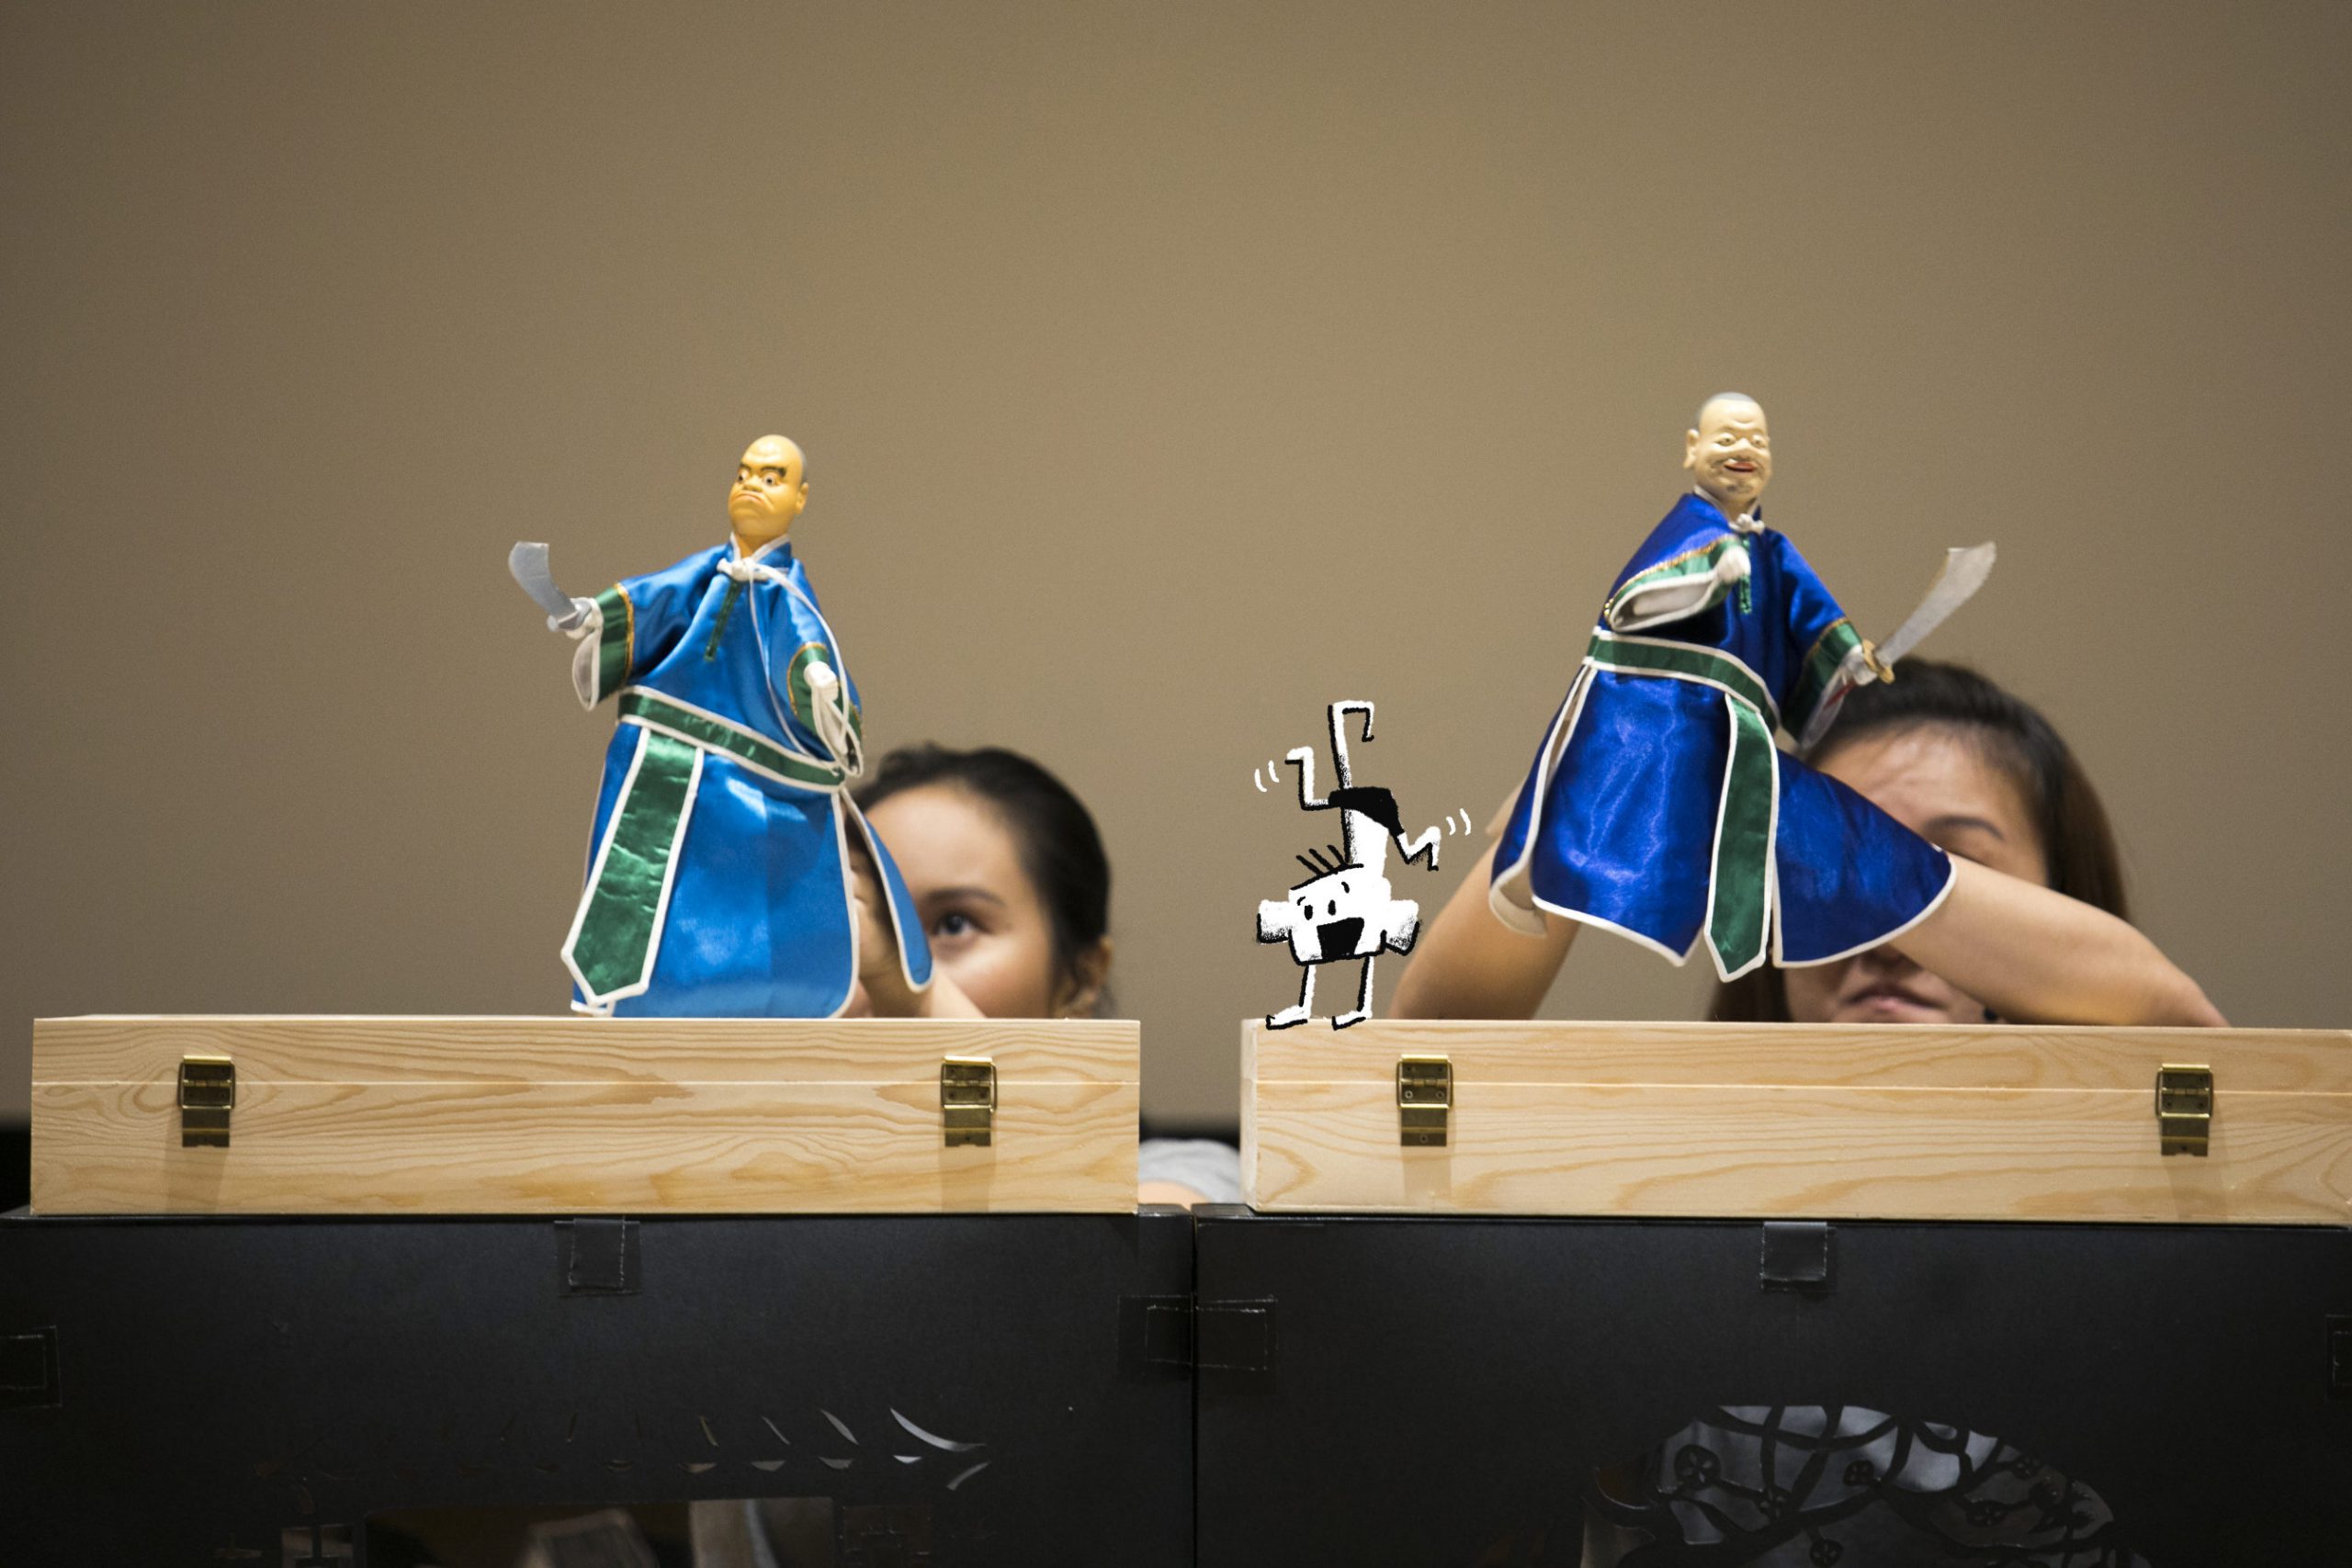 Two traditional hand puppets with swords on hand manipulated by puppeteers